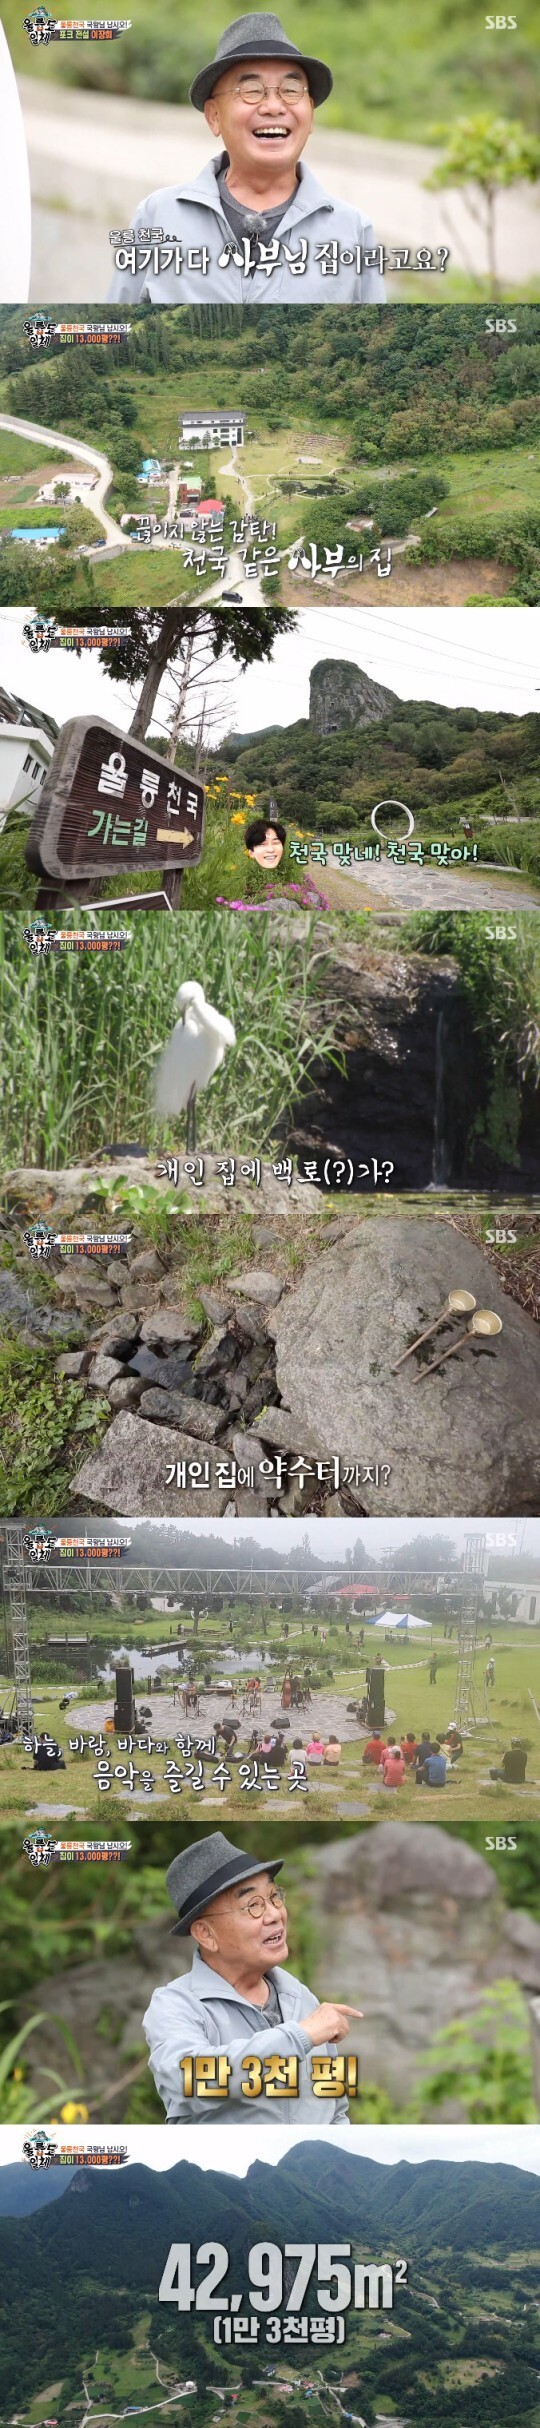 In the SBS entertainment program All The Butlers broadcasted on the 13th, Fork Legend Yi Jang-hui, who designed his own heaven in Ulleungdo, appeared as master.On this day, the members could not shut up to the minister who was unfolded as soon as they entered the Ulleung Airport Heaven of Yi Jang-huis house.The members poured out their admiration such as Is this all home, It is so cool here and It is a real heaven.Inside the house were a pond with a backlog, a natural water fountain, and an outdoor performance hall with a seat. Yi Jang-hui said, My favorite is called heaven.This is heaven, he said. The plain water here is 13,000 pyeong including the mountain. Cha Eun-woo, who heard this, expressed awe that it is the richest master ever, and laughed at Yi Jang-hui.Regarding the reason for settling in Ulleungdo, Yi Jang-hui said he stayed in the Seoraksan hermit to find what he liked. One day I climbed the hill behind and the full moon came out.The moonlight was shining through the Searaksan Valley, and it seemed like a fairy would come out, and for the first time I felt Oh! Thats my favorite moment.What I liked was more natural than music, money, and honor. sympathy media